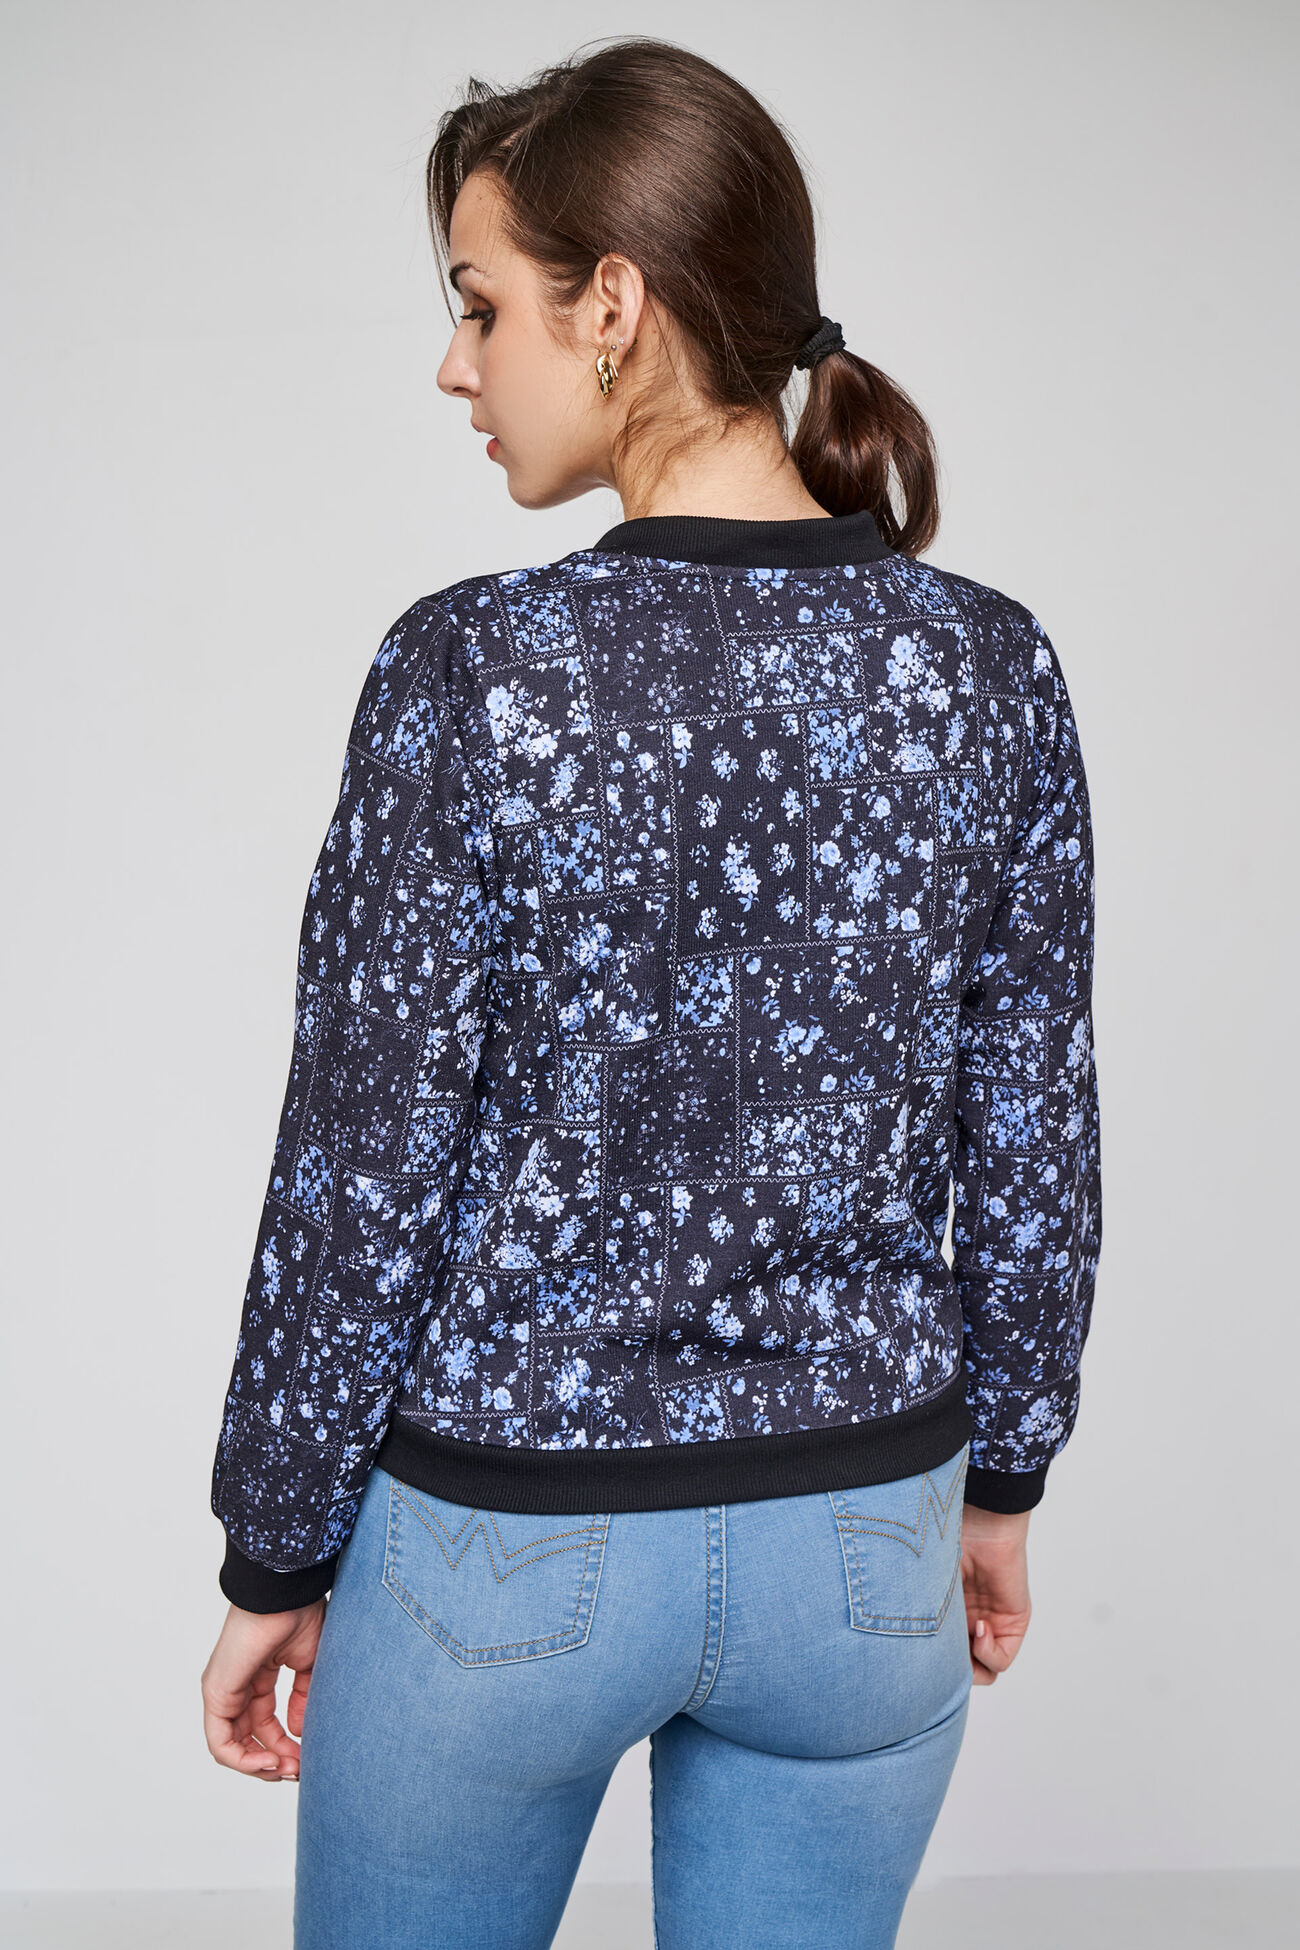 Blue and Black Floral Straight Top, Blue, image 3